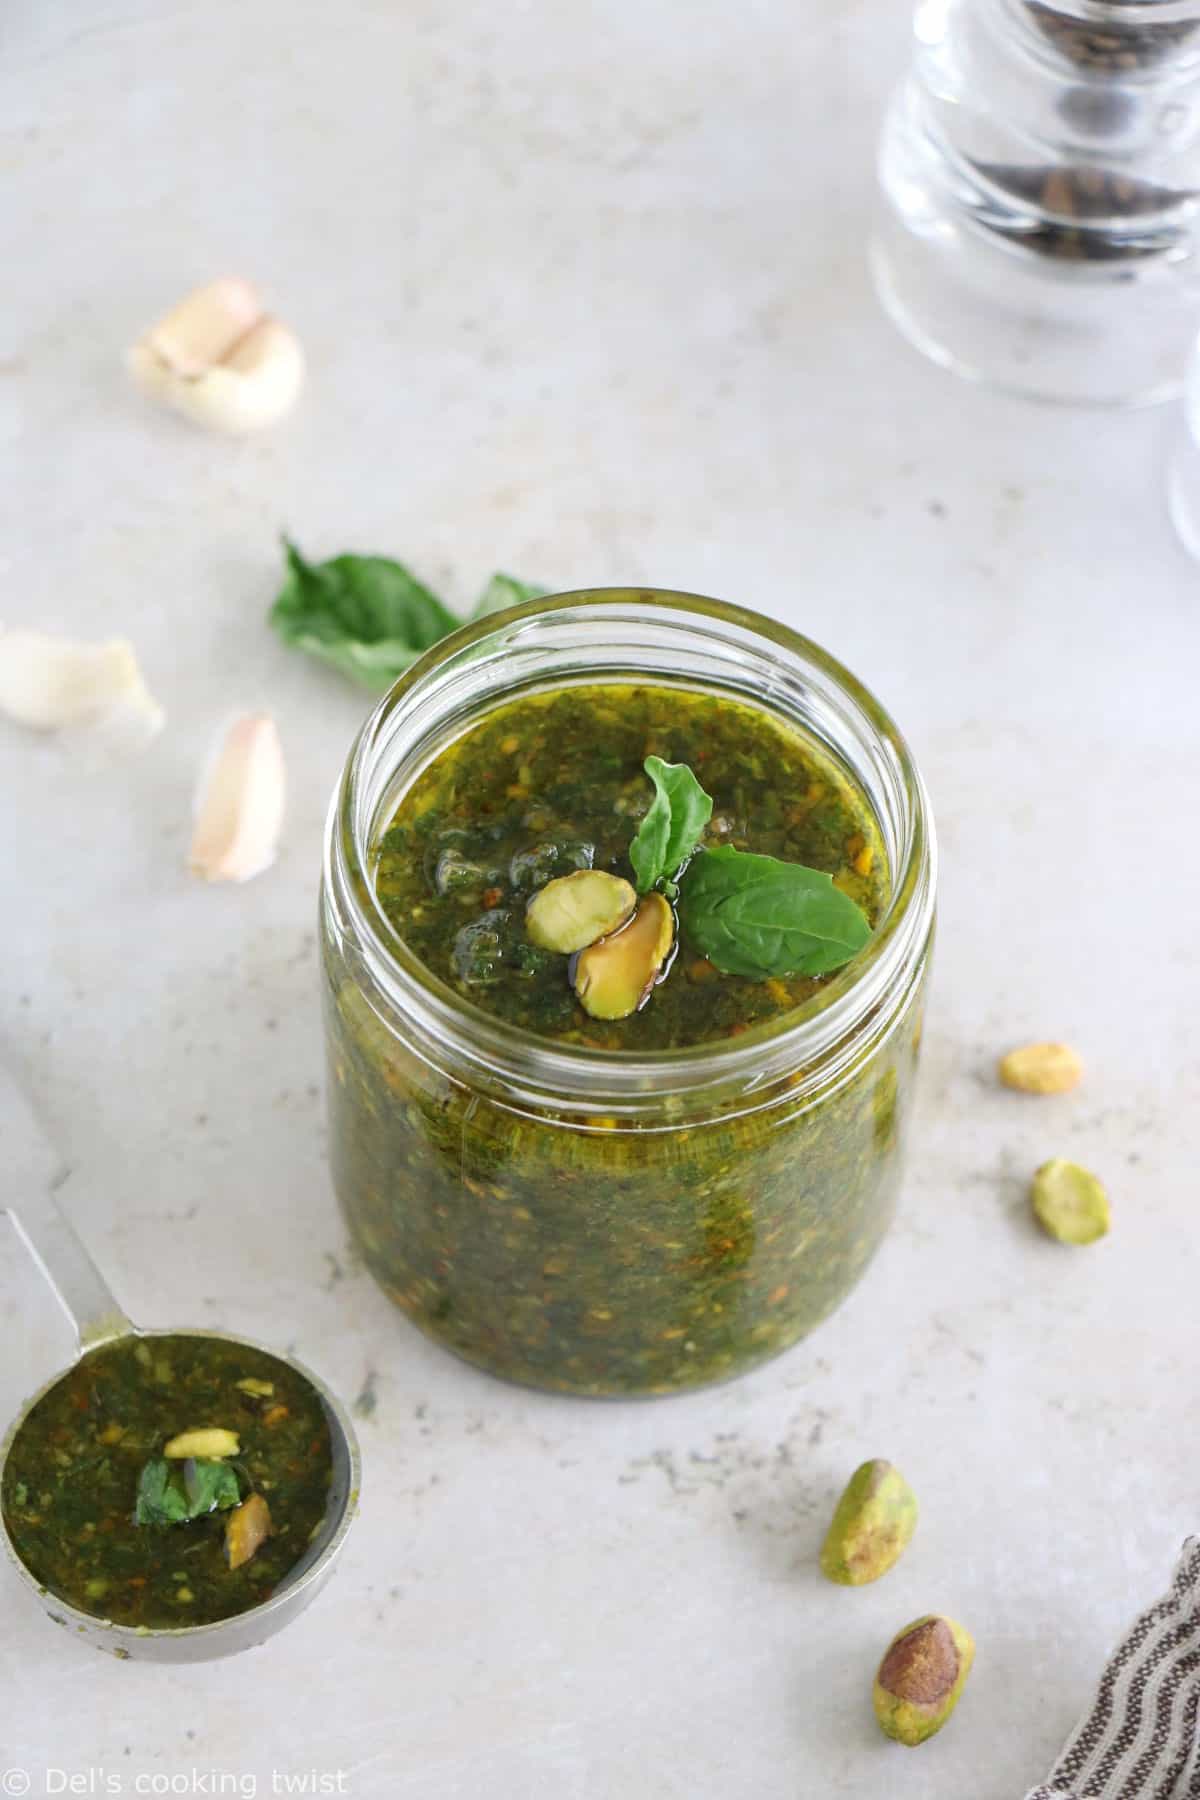 This 5-minute pistachio pesto is a great alternative to your classic basil pesto with pine nuts.